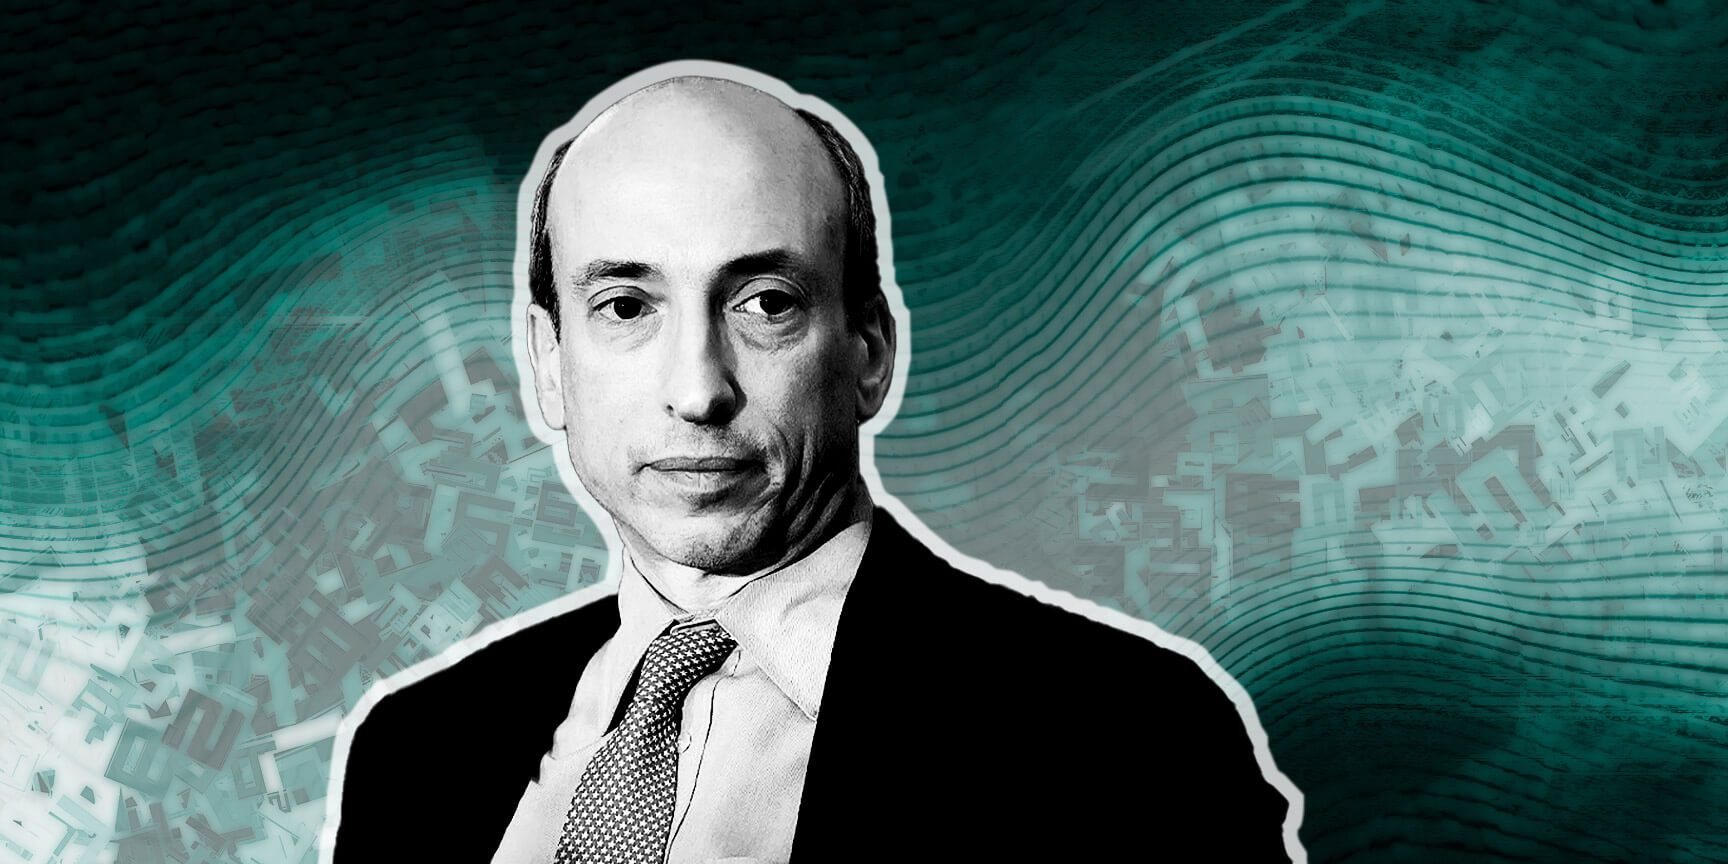 What changed? 2018 video reveals SEC Chair Gensler’s contradictory view on crypto